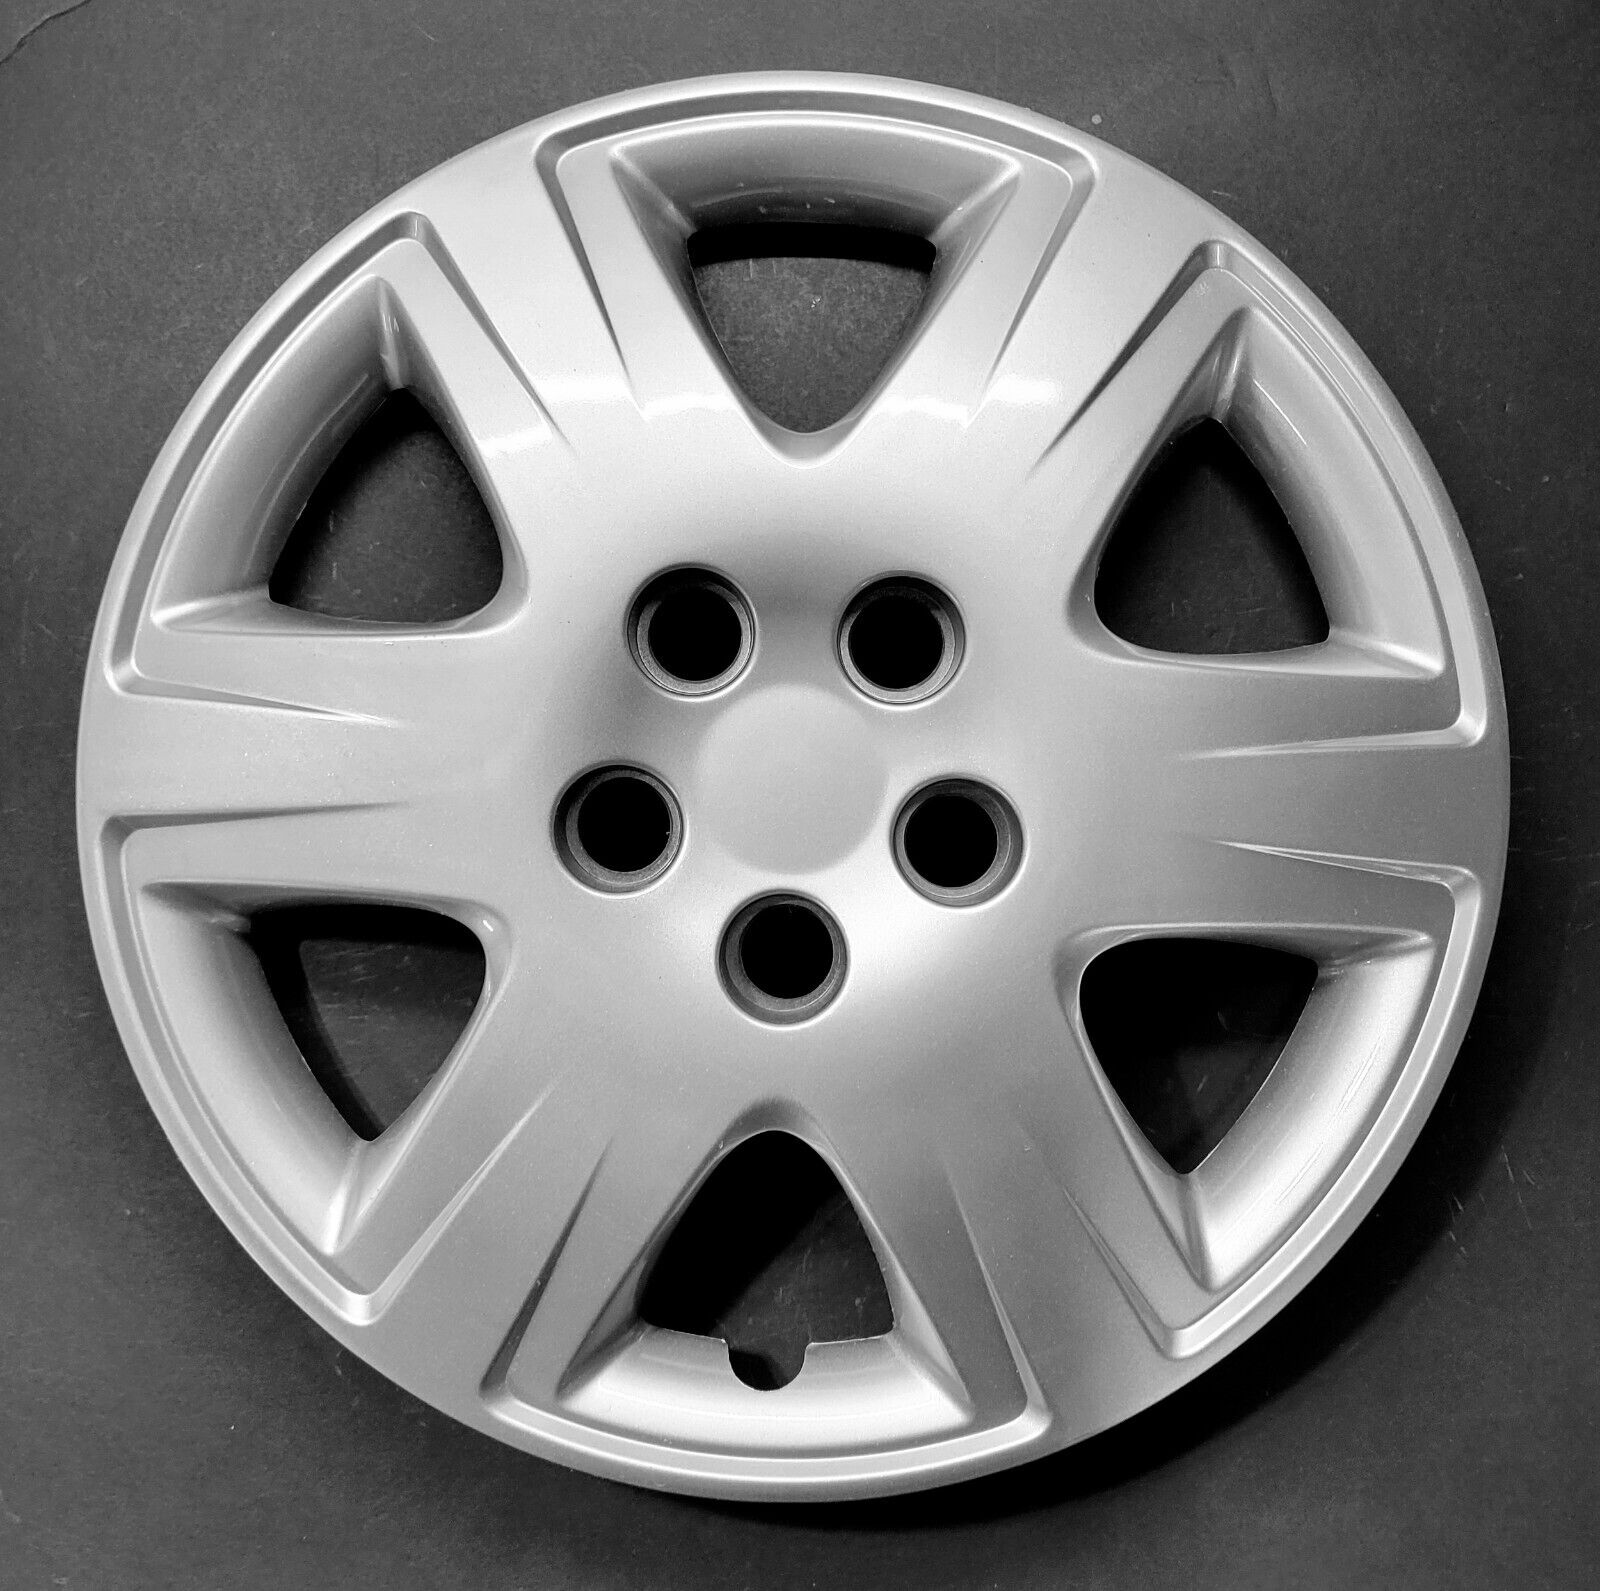 One Wheel Cover Hubcap Fits 2005-2008 Toyota Corolla 15